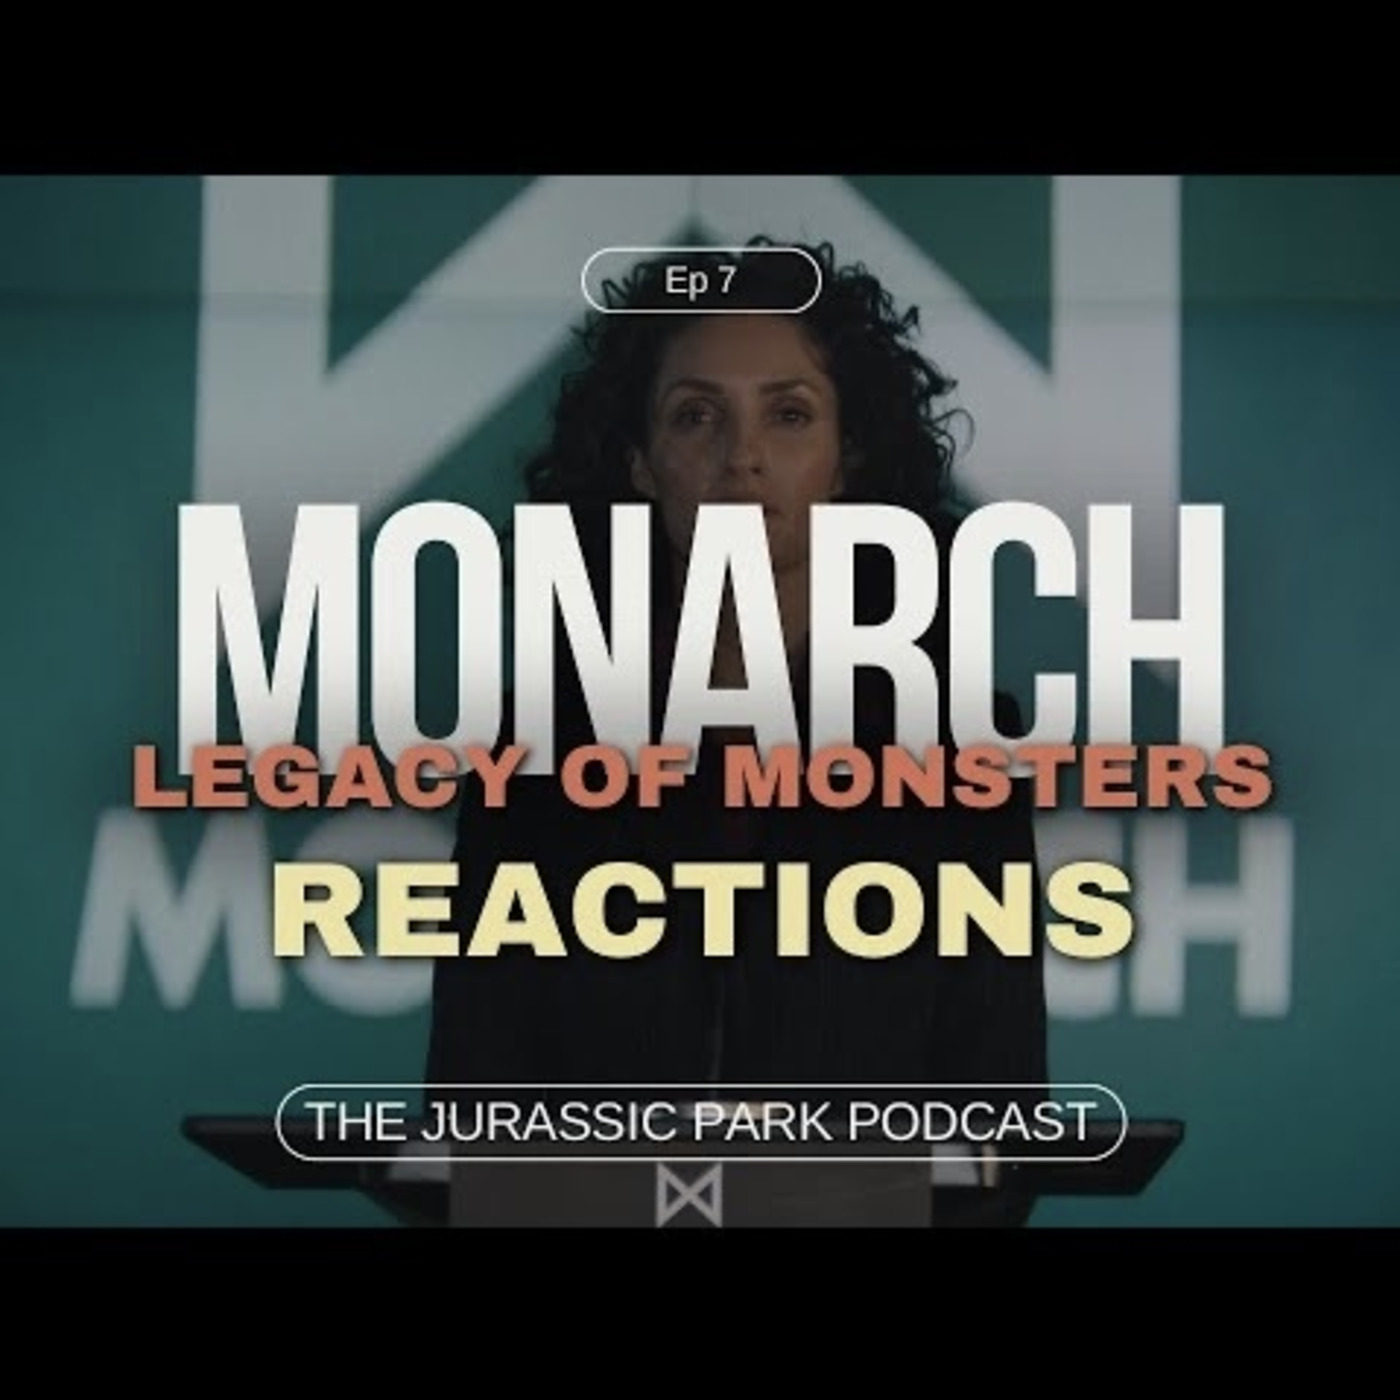 MONARCH: LEGACY OF MONSTERS | Episode 7 "Will the Real May Please Stand Up?"